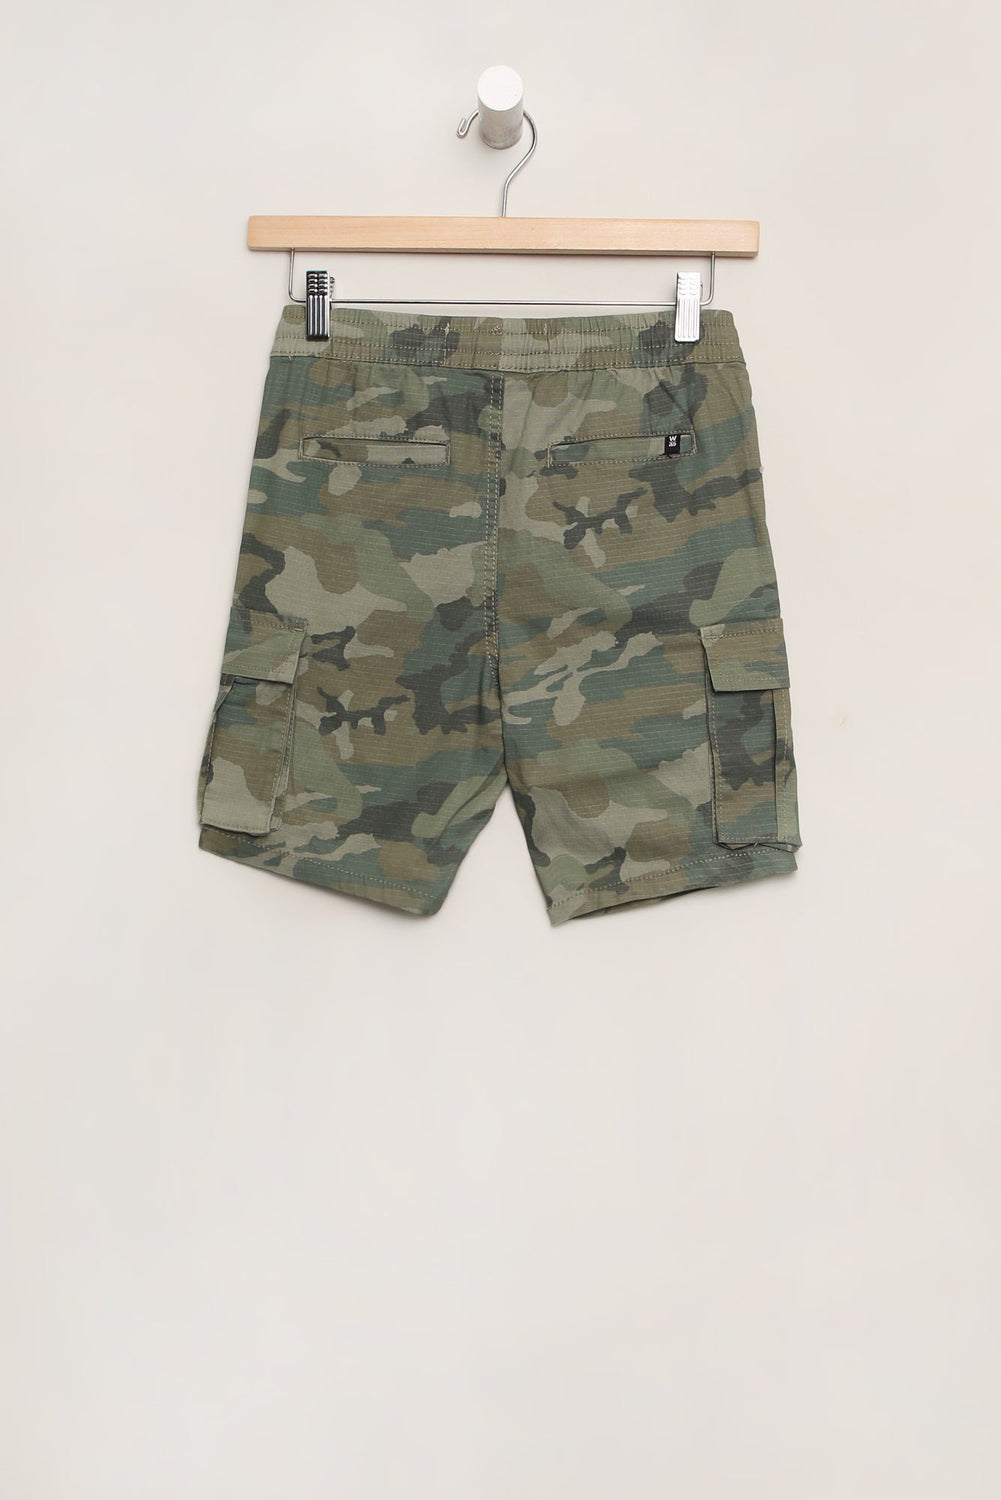 West49 Youth Camo Cargo Jogger Shorts West49 Youth Camo Cargo Jogger Shorts